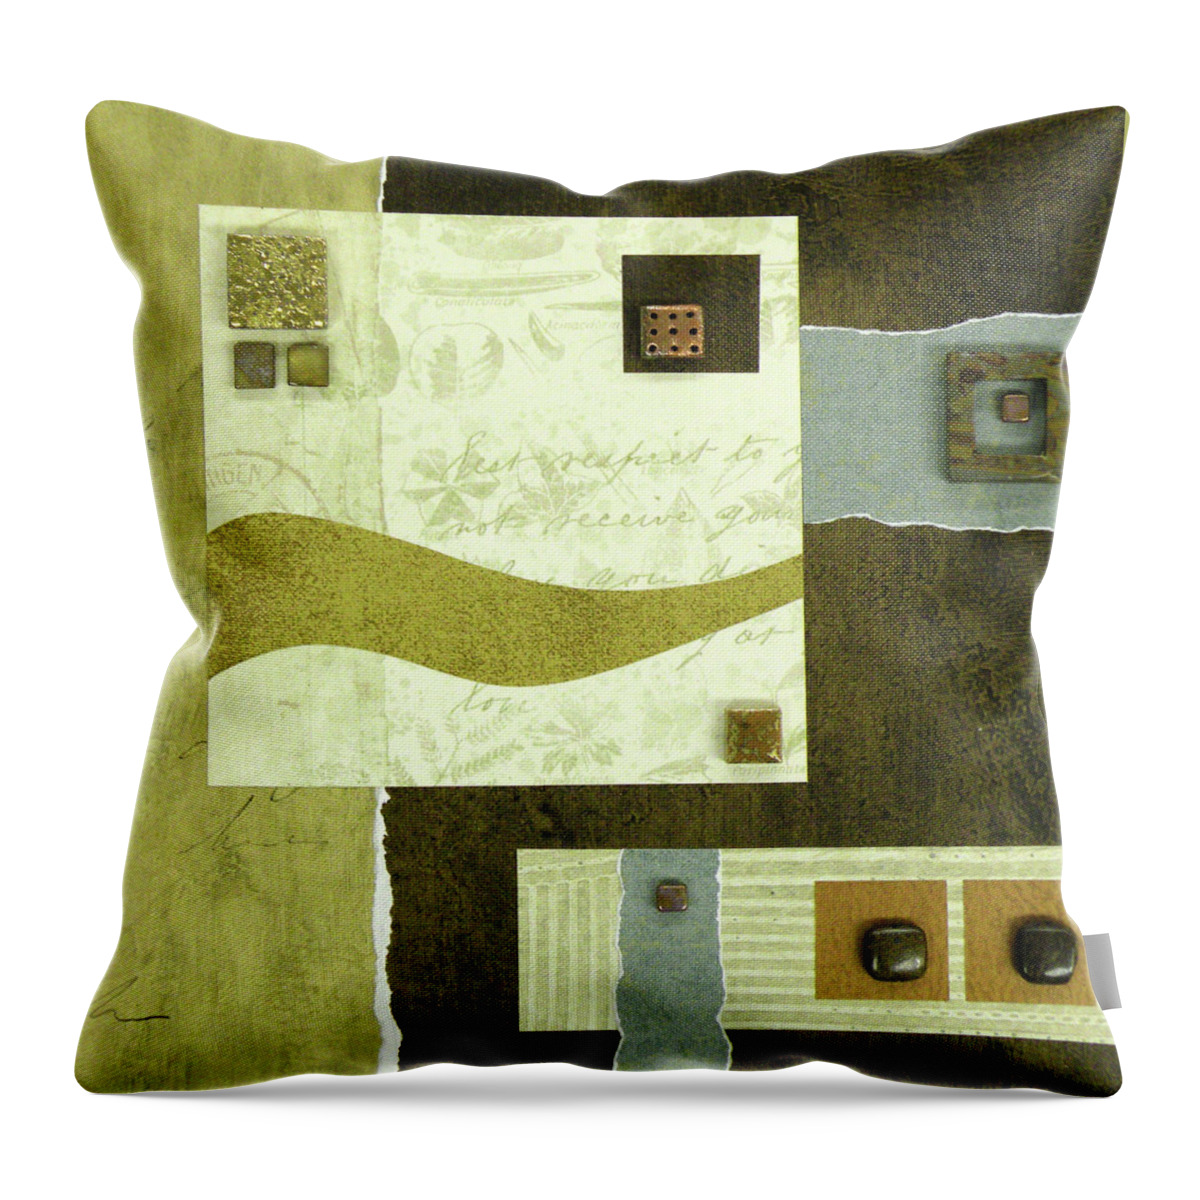 Mixed-media Throw Pillow featuring the mixed media Golden Moment by MaryJo Clark